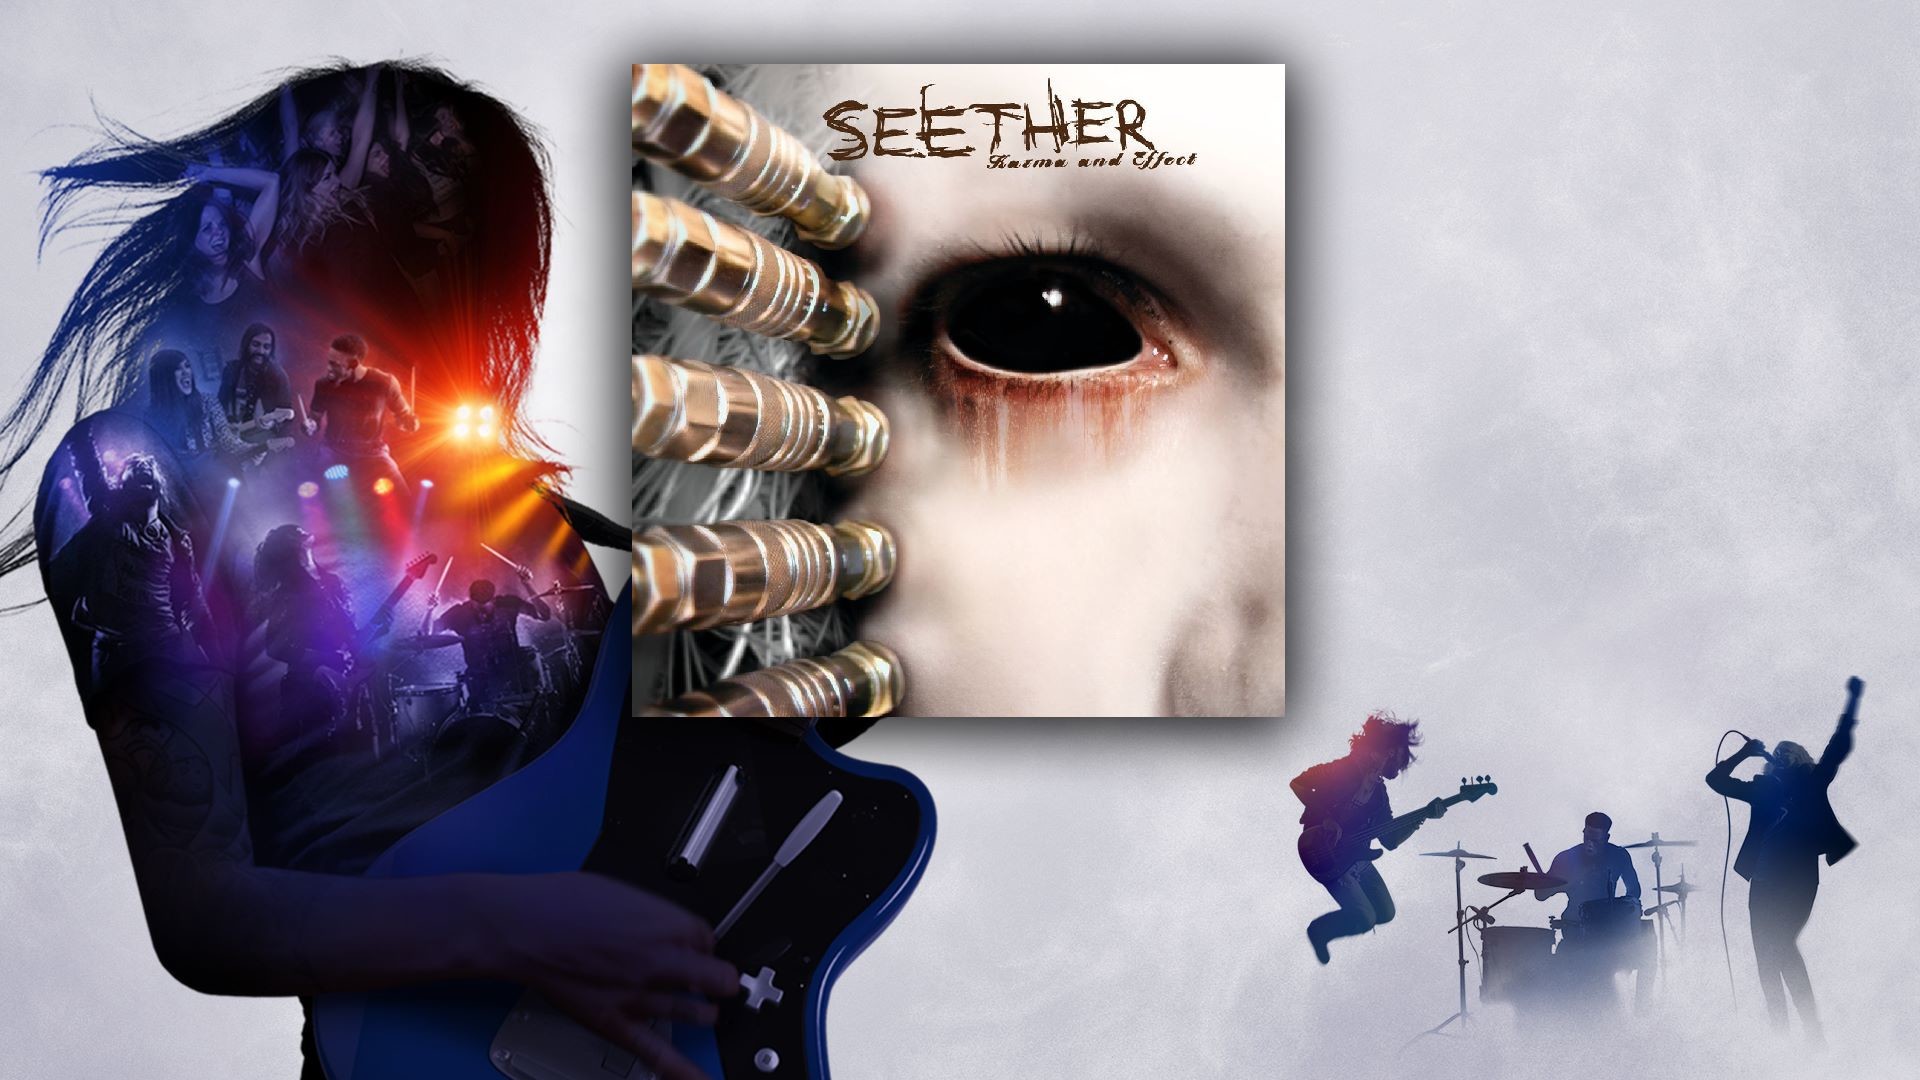 1920x1080 "Remedy" - Seether. "